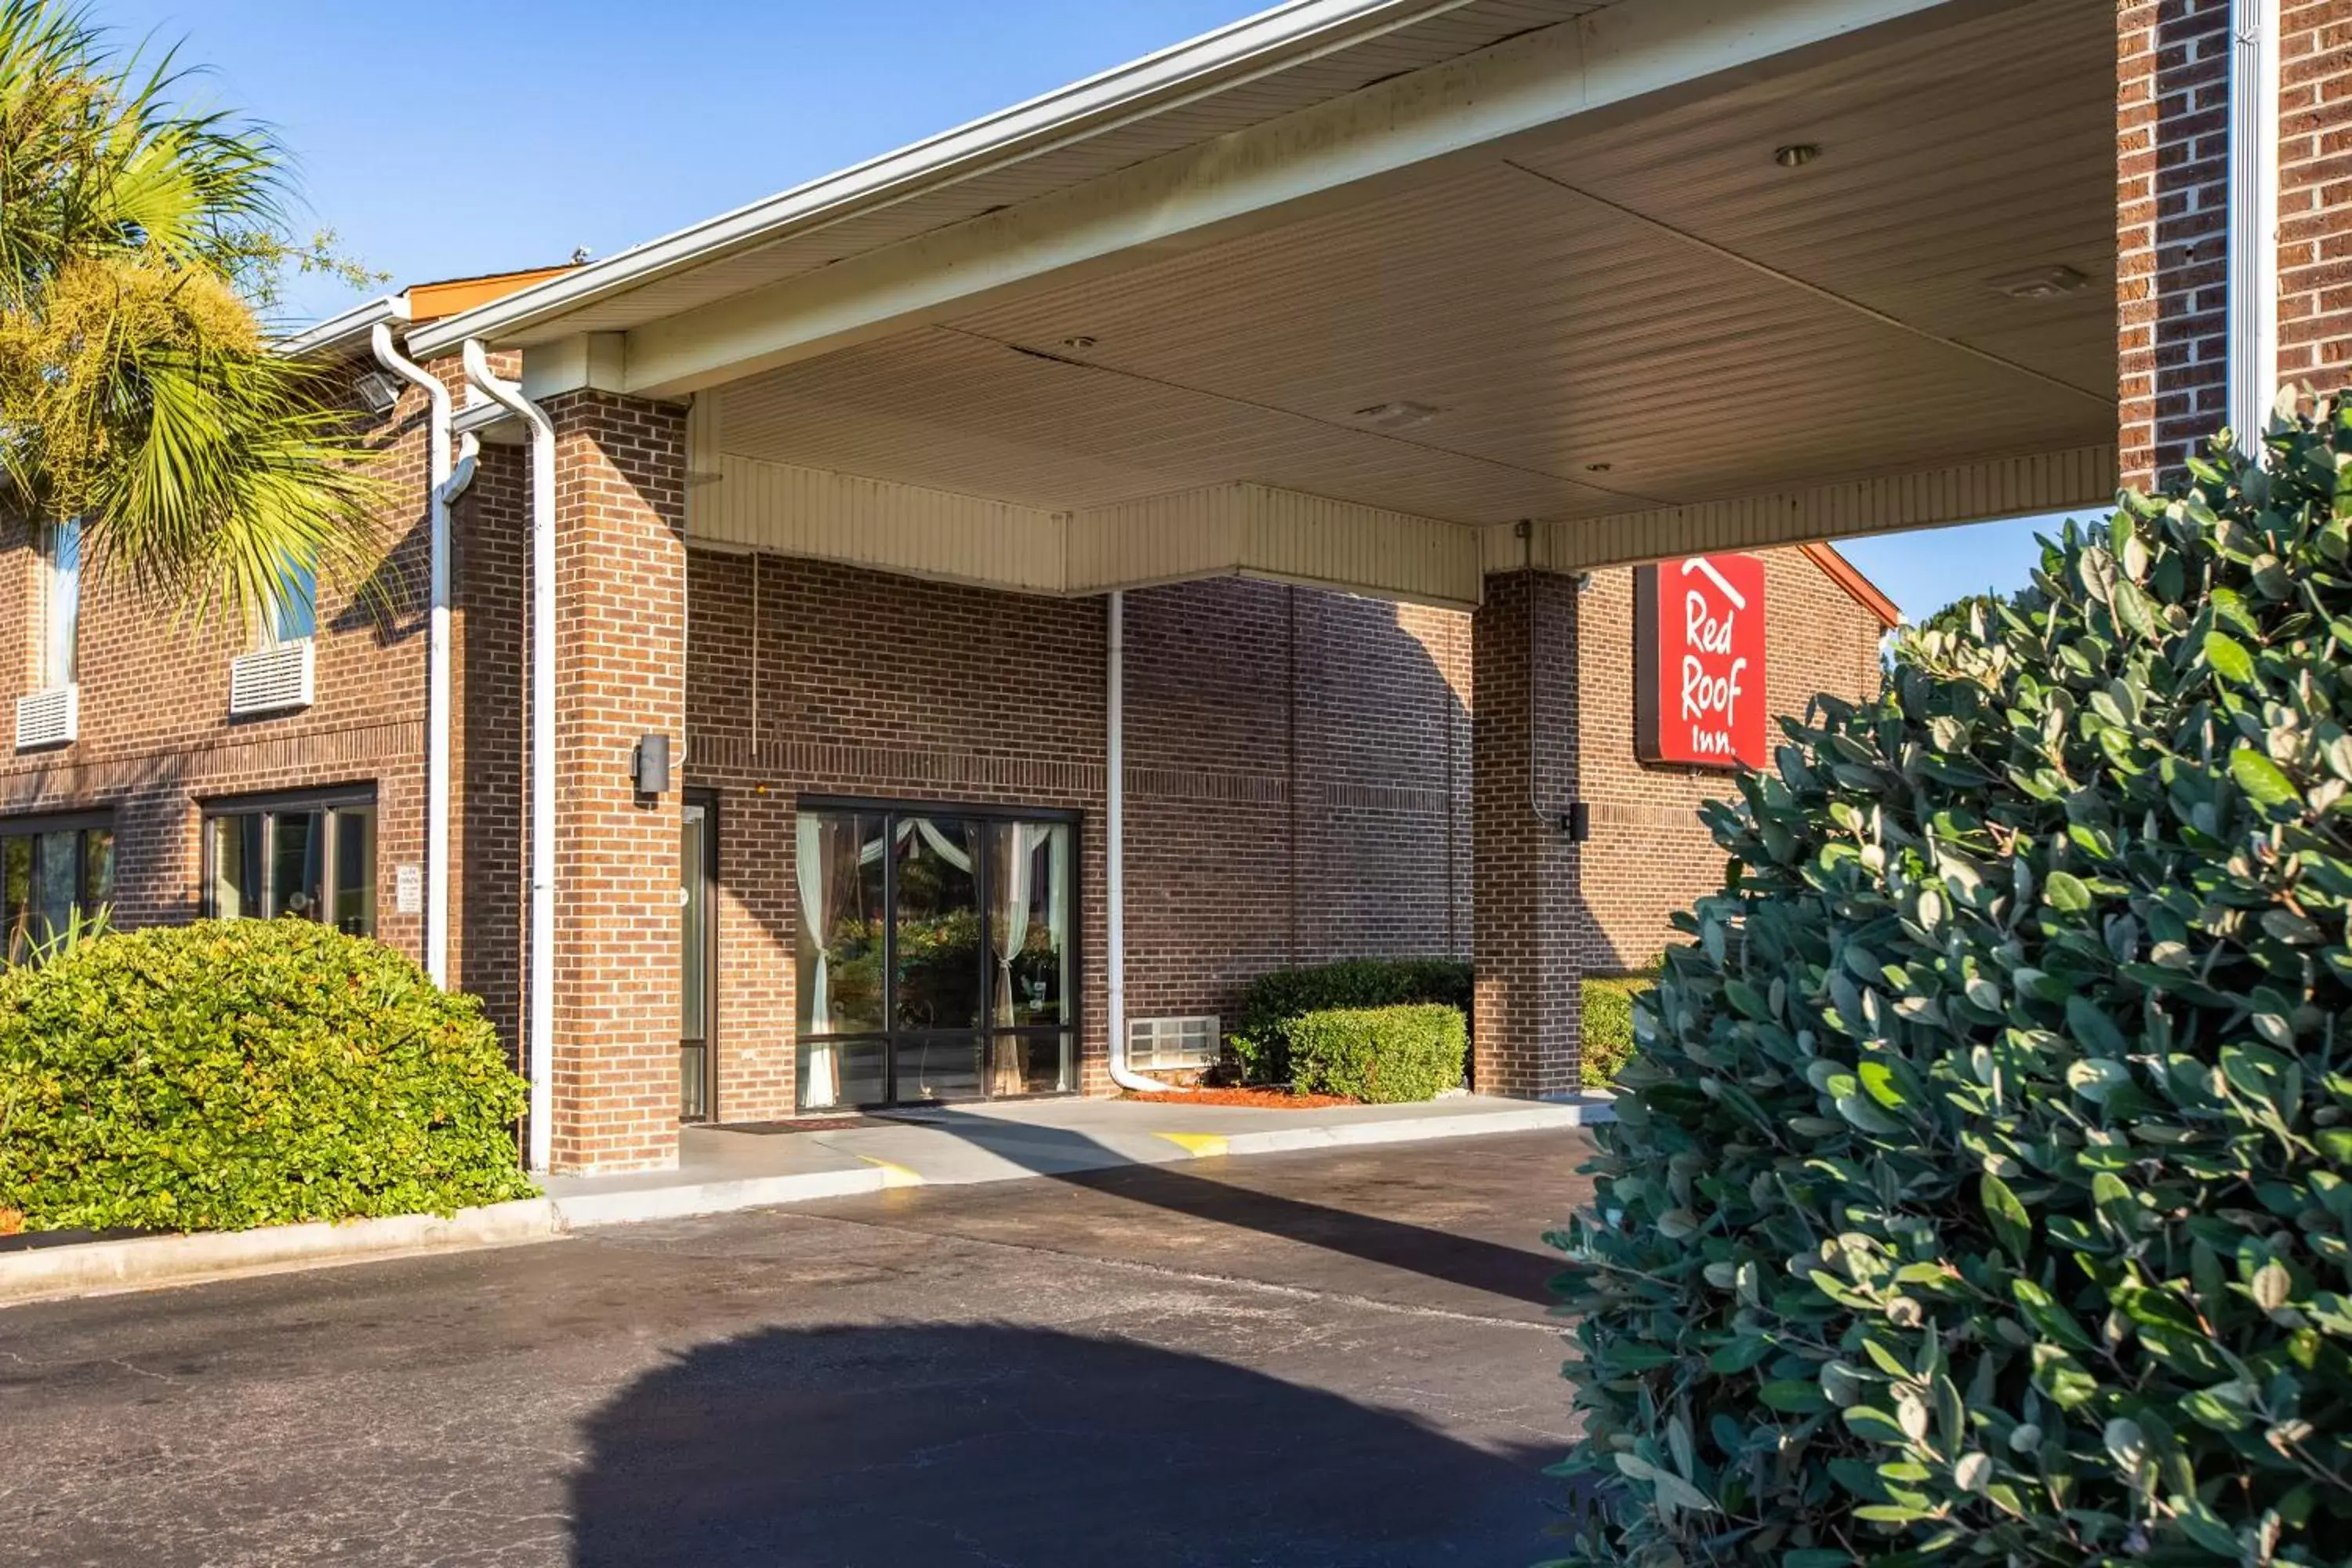 Property building in Red Roof Inn Hardeeville